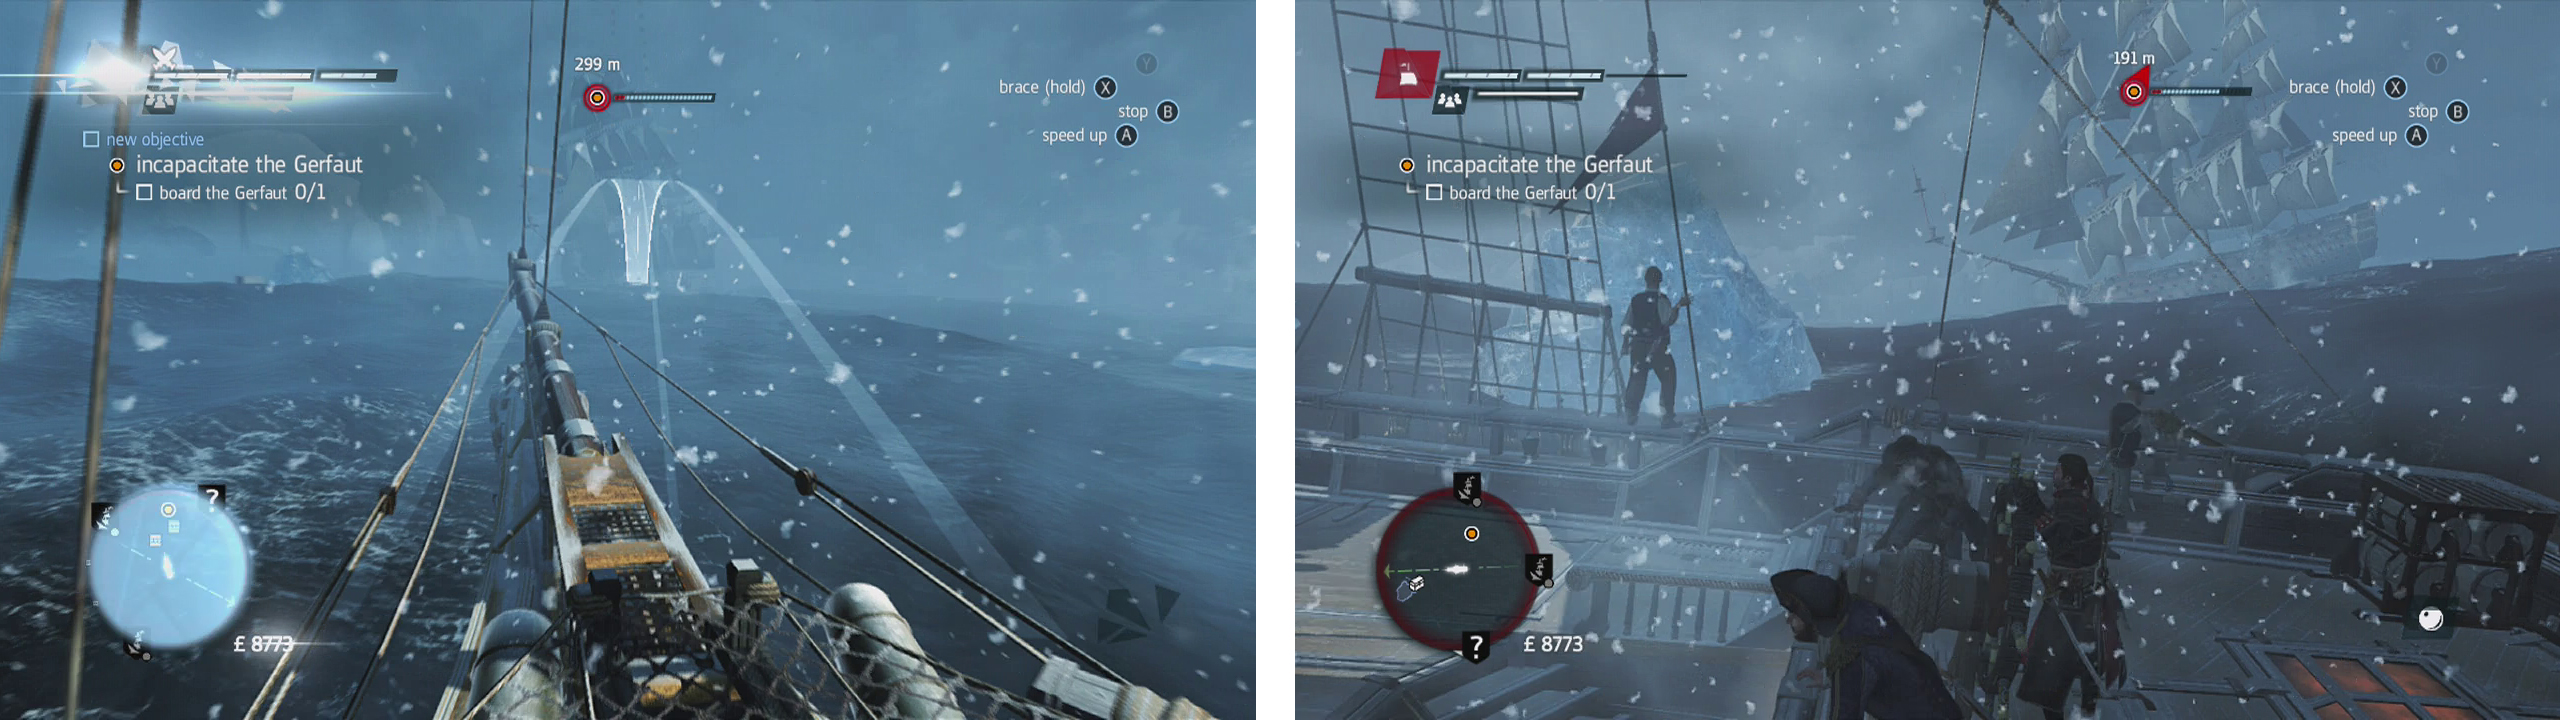 Once you have spotted the ship (left) you'll have to take it down - be sure to avoid the ice bergs for that optional objective (right).